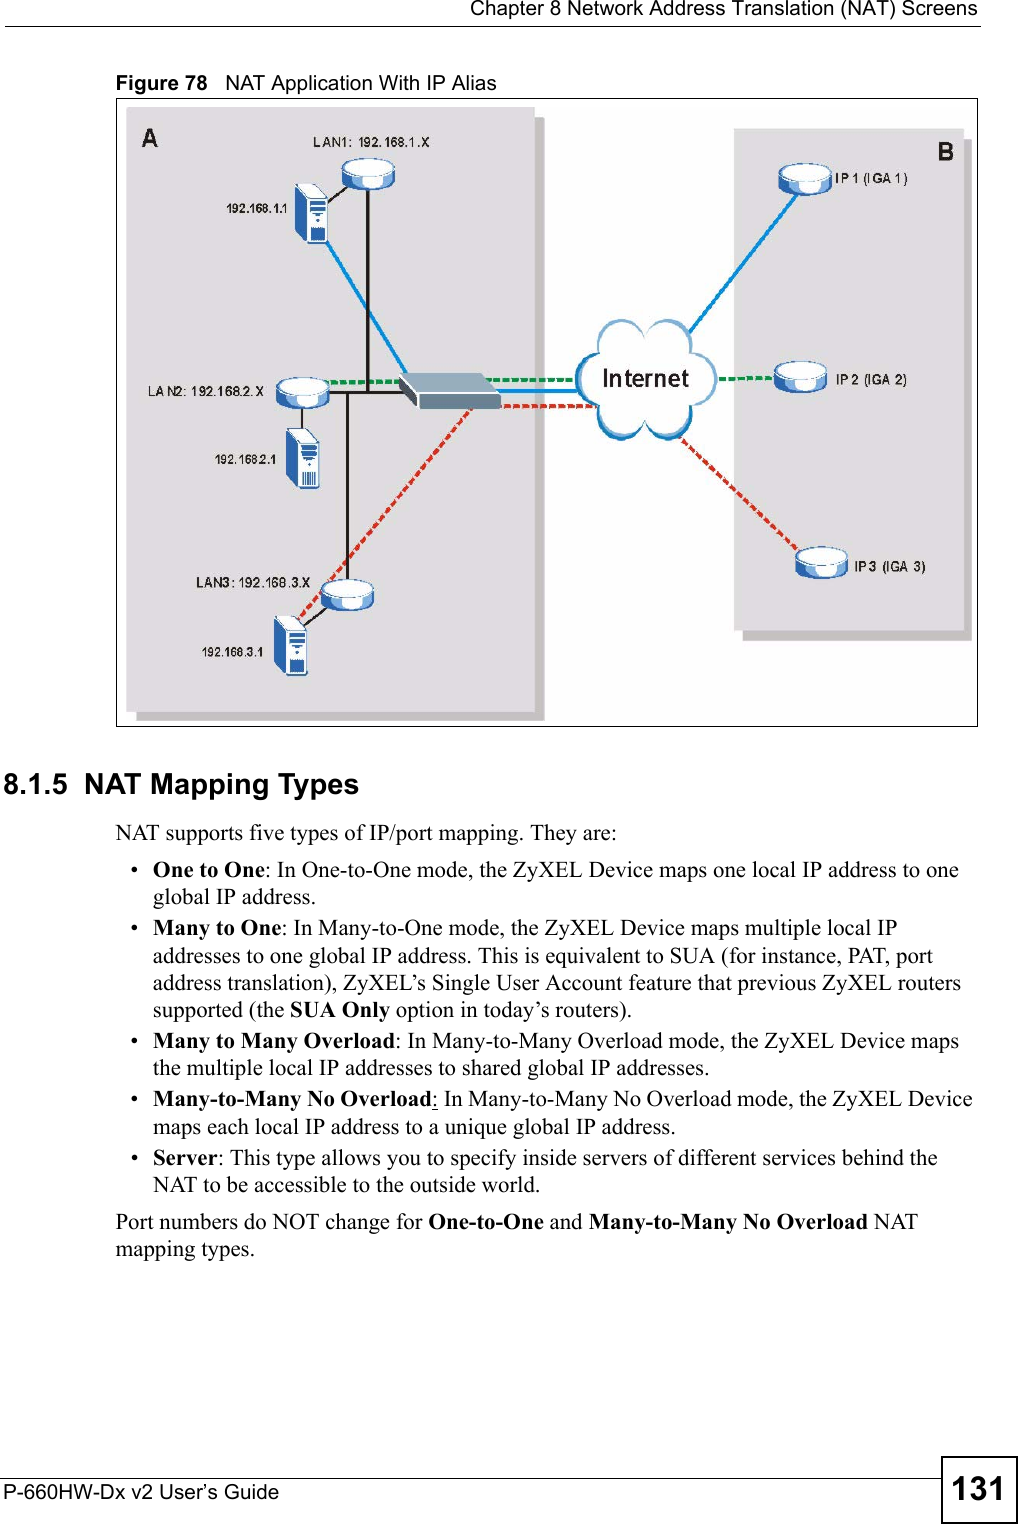  Chapter 8 Network Address Translation (NAT) ScreensP-660HW-Dx v2 User’s Guide 131Figure 78   NAT Application With IP Alias8.1.5  NAT Mapping TypesNAT supports five types of IP/port mapping. They are:•One to One: In One-to-One mode, the ZyXEL Device maps one local IP address to one global IP address.•Many to One: In Many-to-One mode, the ZyXEL Device maps multiple local IP addresses to one global IP address. This is equivalent to SUA (for instance, PAT, port address translation), ZyXEL’s Single User Account feature that previous ZyXEL routers supported (the SUA Only option in today’s routers). •Many to Many Overload: In Many-to-Many Overload mode, the ZyXEL Device maps the multiple local IP addresses to shared global IP addresses.•Many-to-Many No Overload: In Many-to-Many No Overload mode, the ZyXEL Device maps each local IP address to a unique global IP address. •Server: This type allows you to specify inside servers of different services behind the NAT to be accessible to the outside world.Port numbers do NOT change for One-to-One and Many-to-Many No Overload NAT mapping types. 